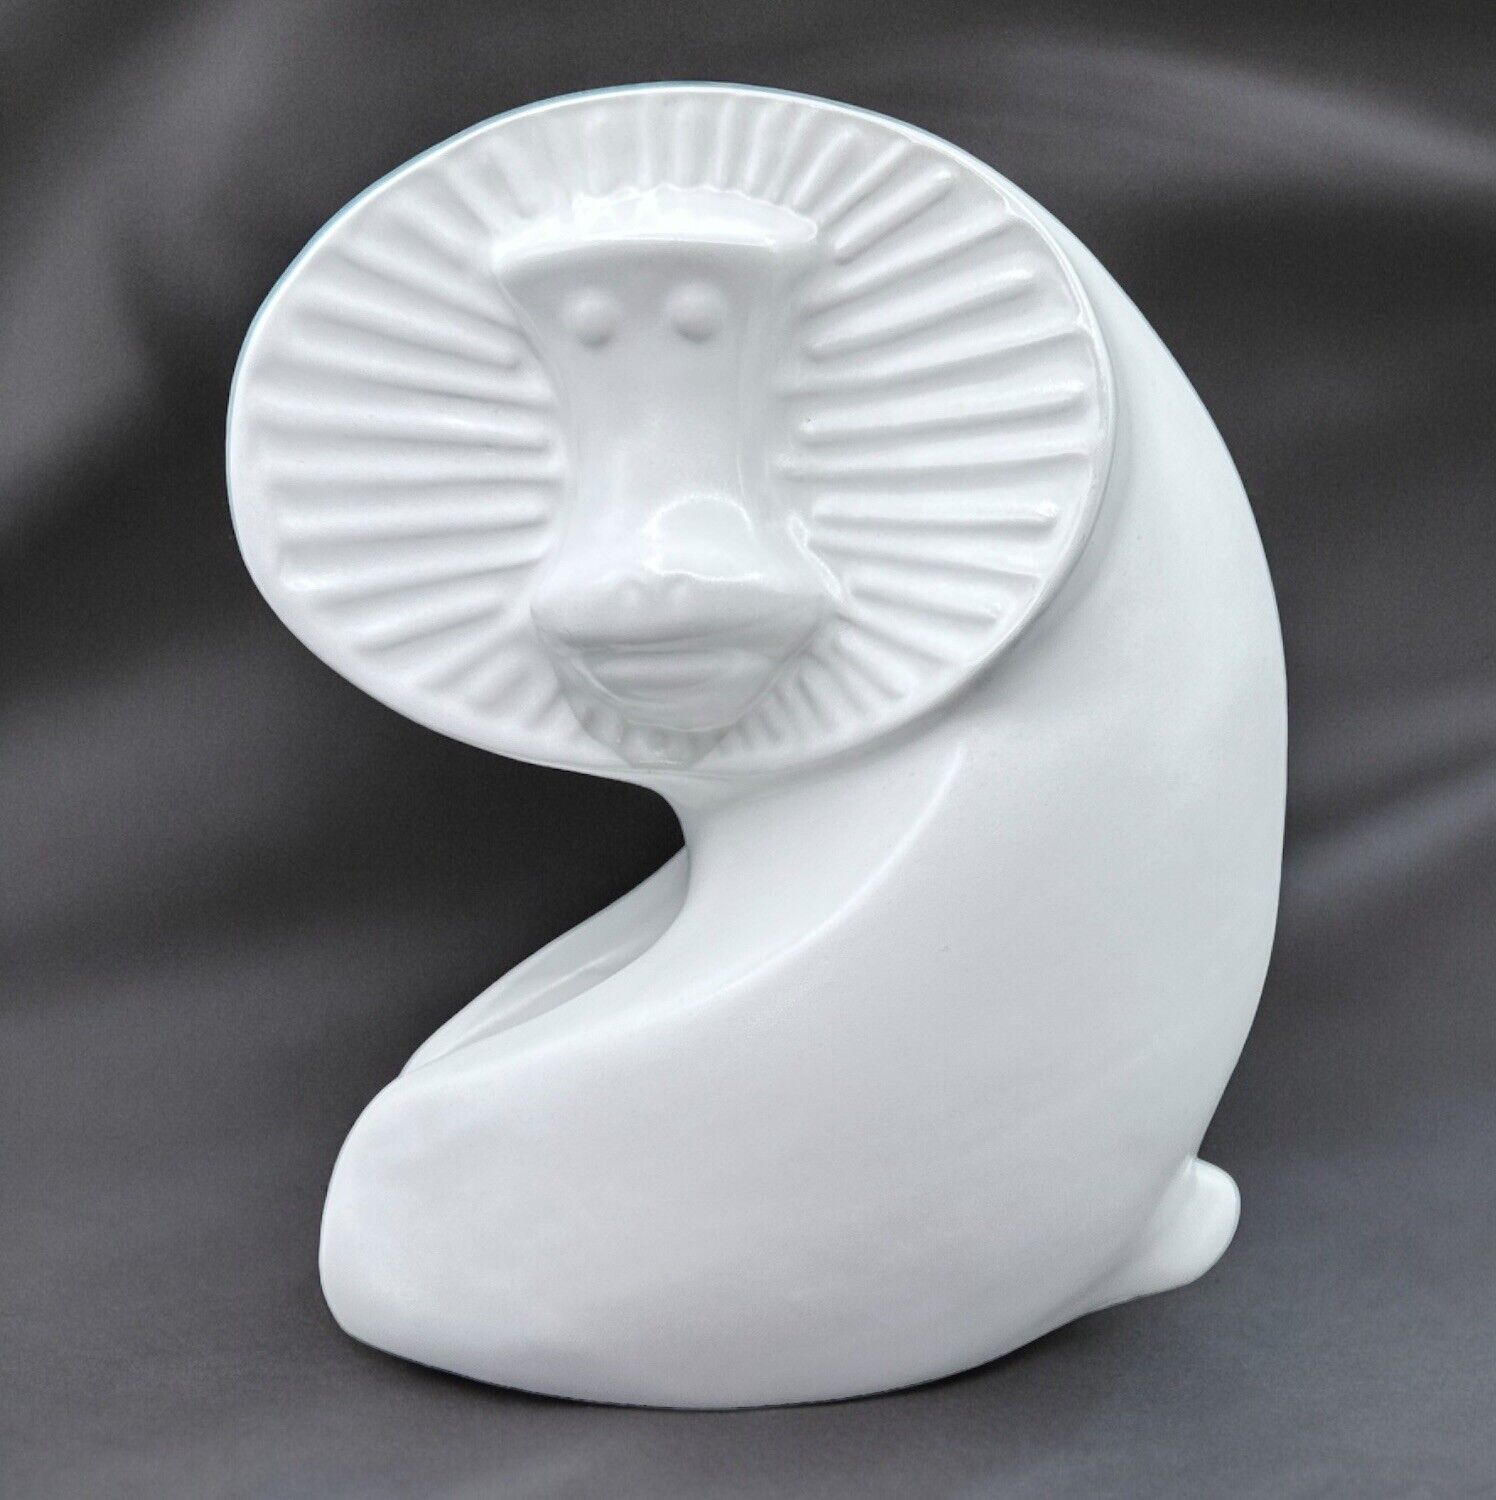 Jonathan Adler Pottery Ceramic Baboon Sculpture in White Early Menagerie